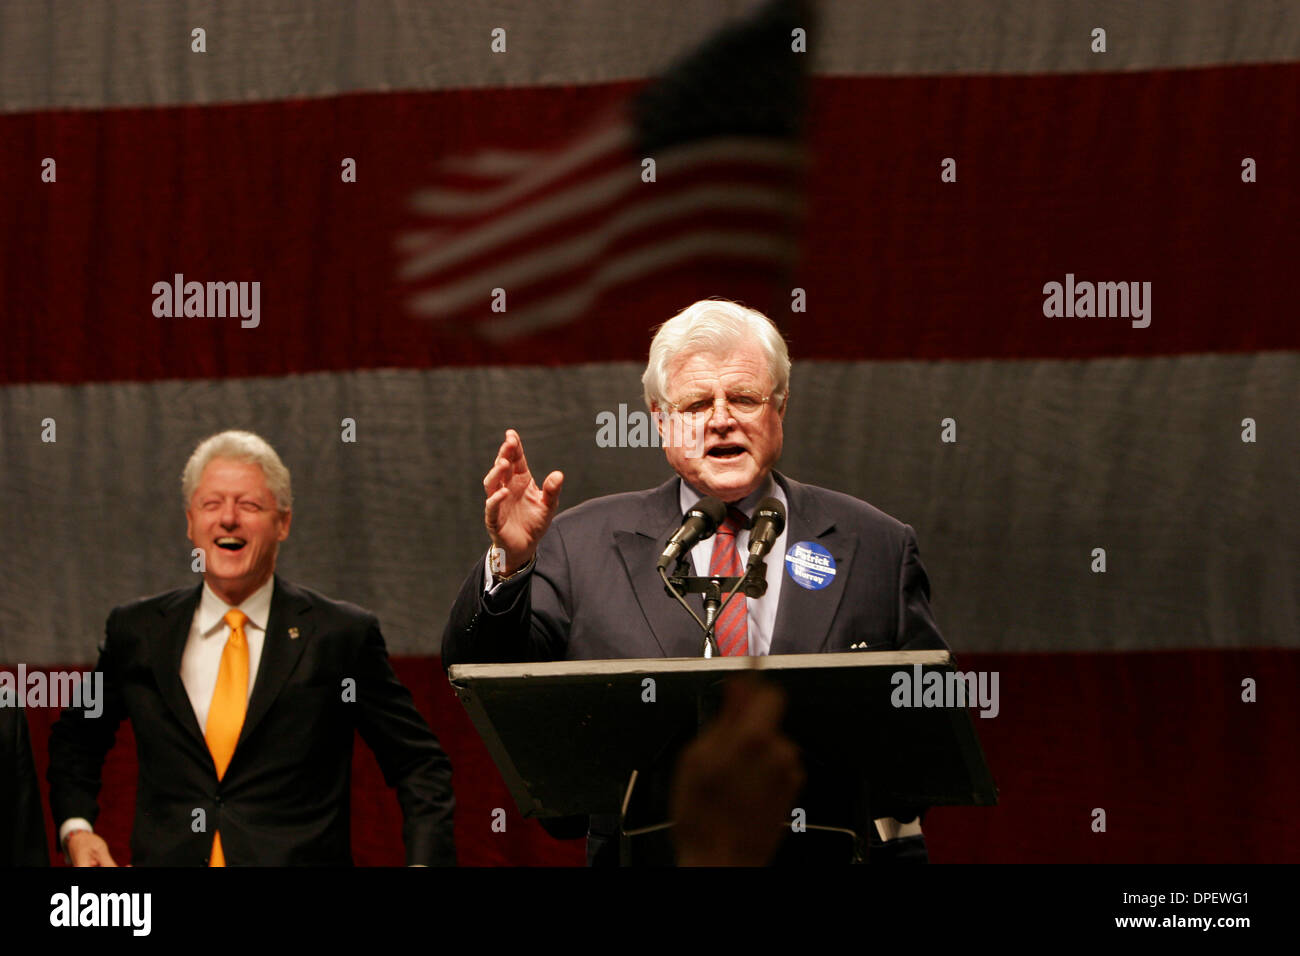 Oct 24, 2006 - Worcester , Massachusetts, USA - With former president BILL CLINTON in the background, and a supporter waving an American flag in the foreground, Massachusetts Senior Senator TED KENNEDY addresses a crowd at the Worcester DCU Center in support of the Deval Patrick campaign. (Credit Image: © Nathan Fried-Lipski/ZUMA Press) Stock Photo